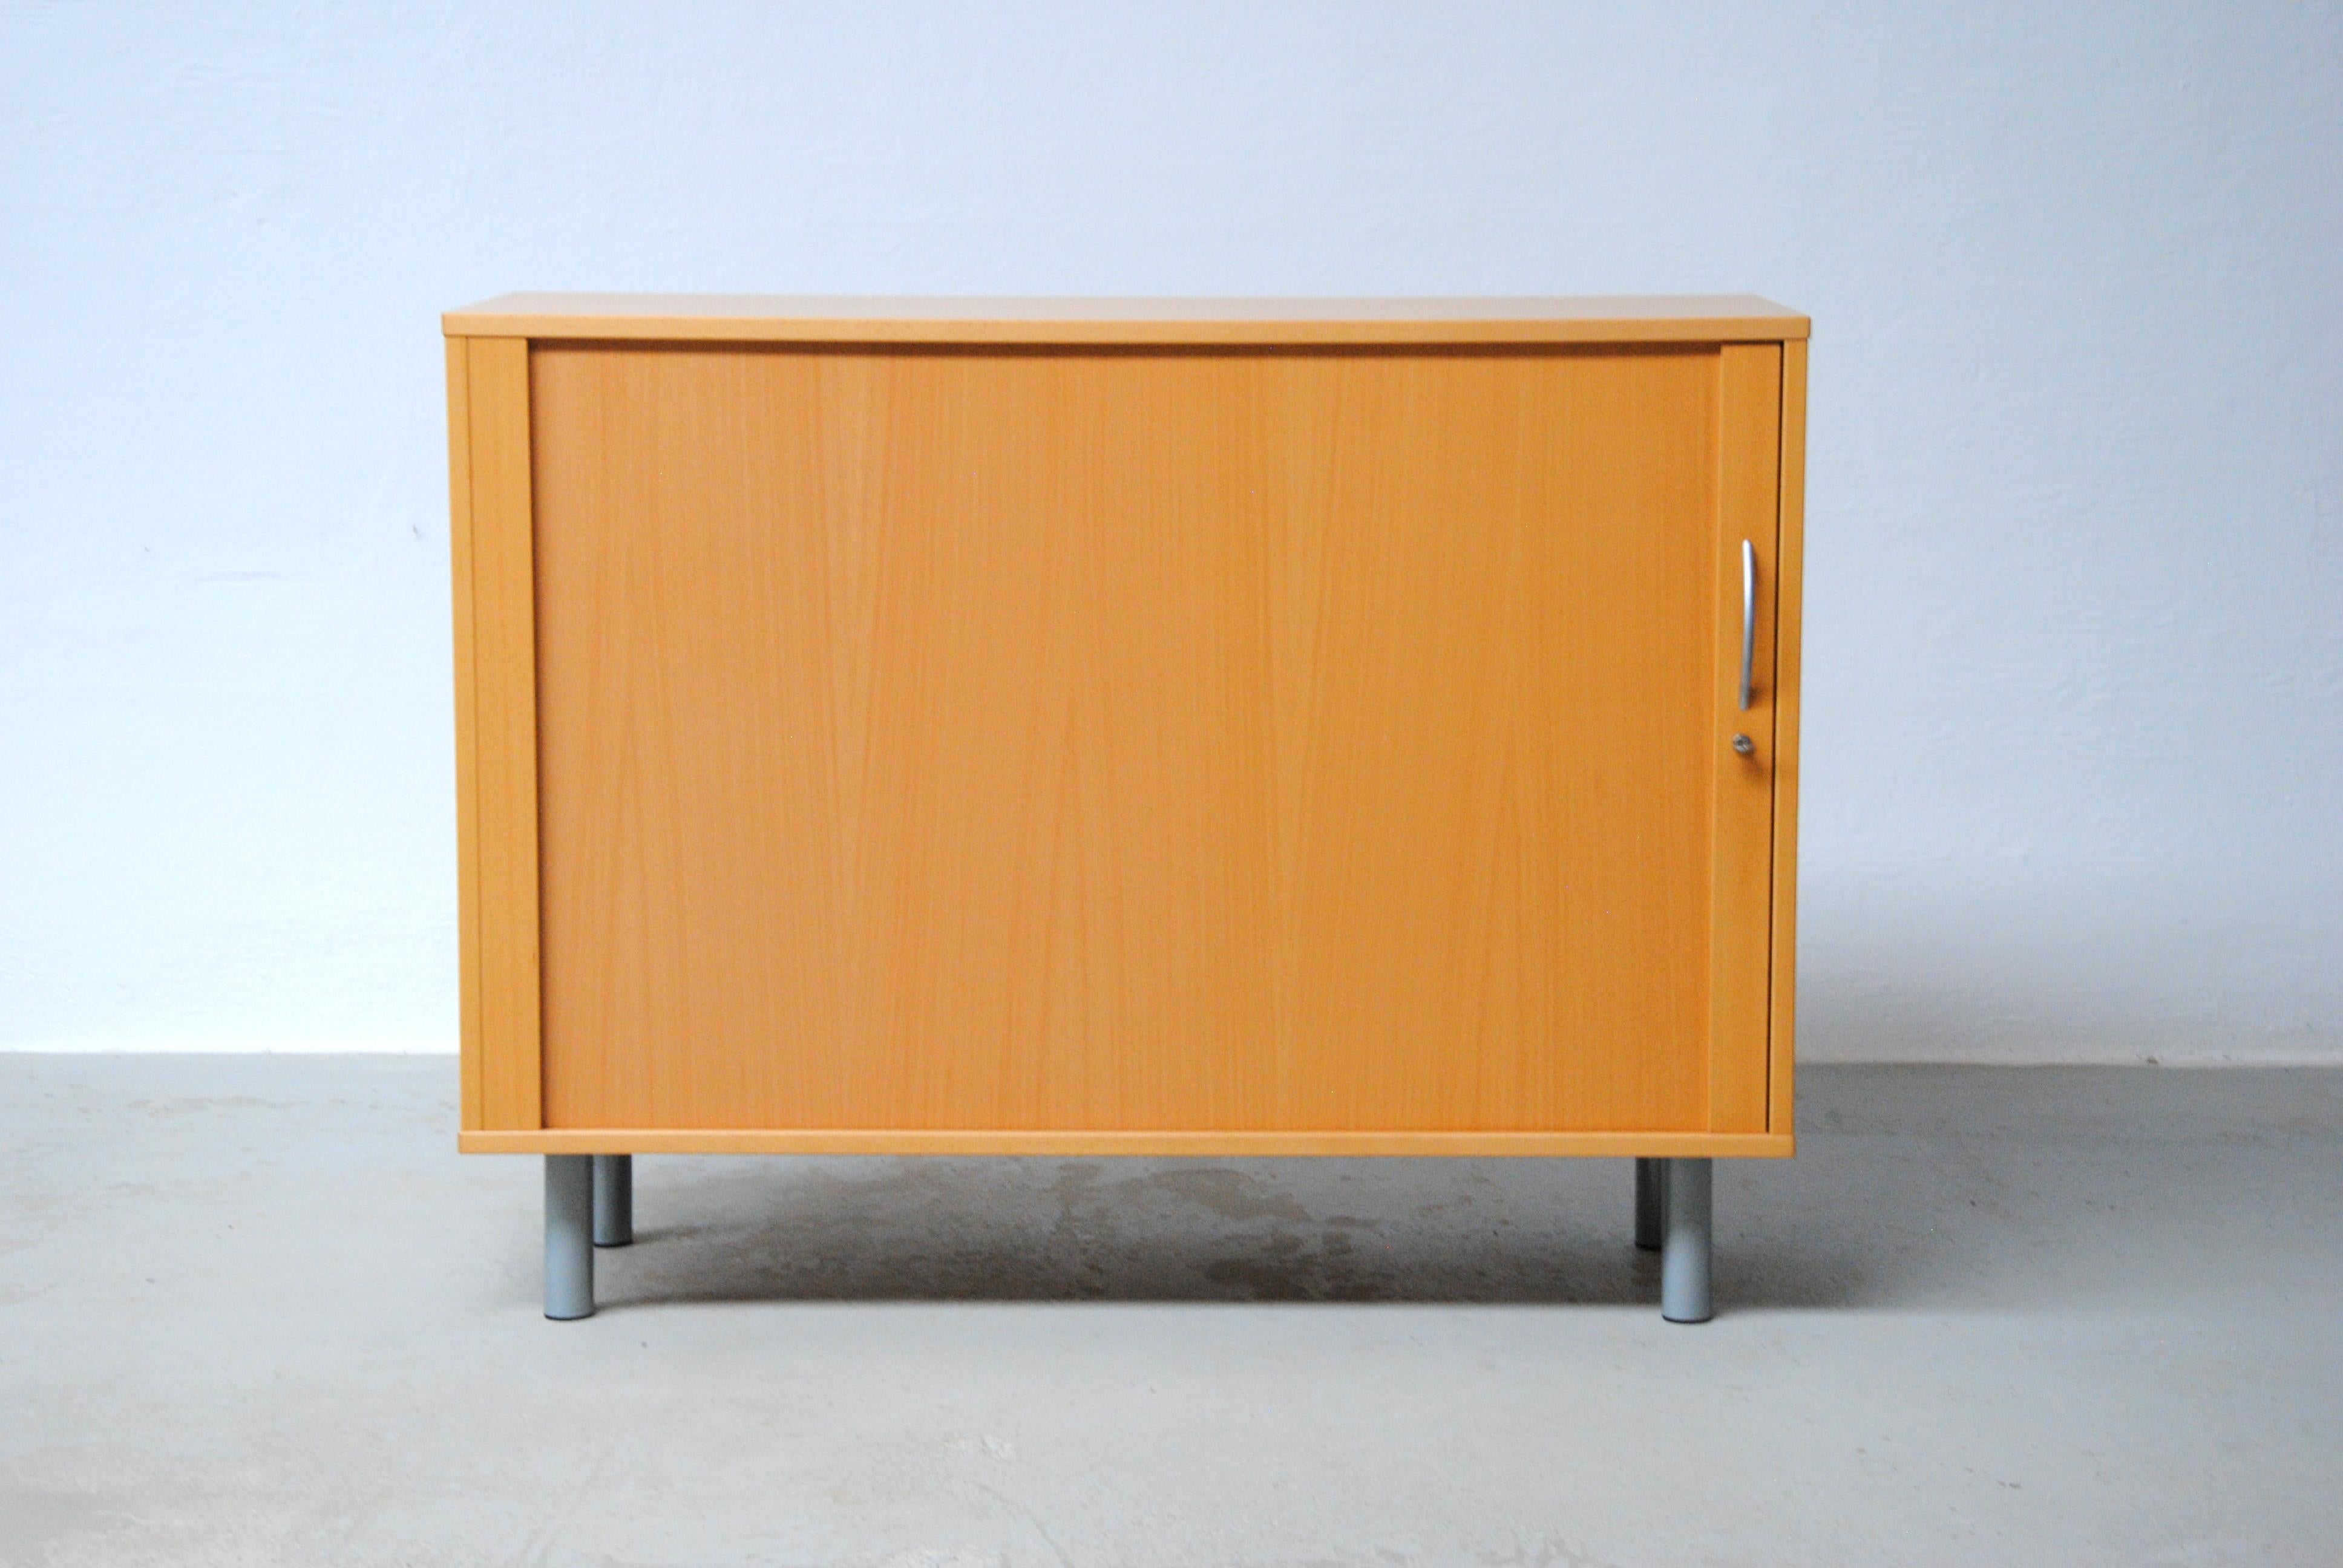 1990's Danish Bent Silberg cabinets with jealousy doors by Bent Silberg Mobler

Well designed spacious cabinets with jealousy doors that slide into the cabinet when opend and beech veneered on the back so they can be placed where ever you wish for